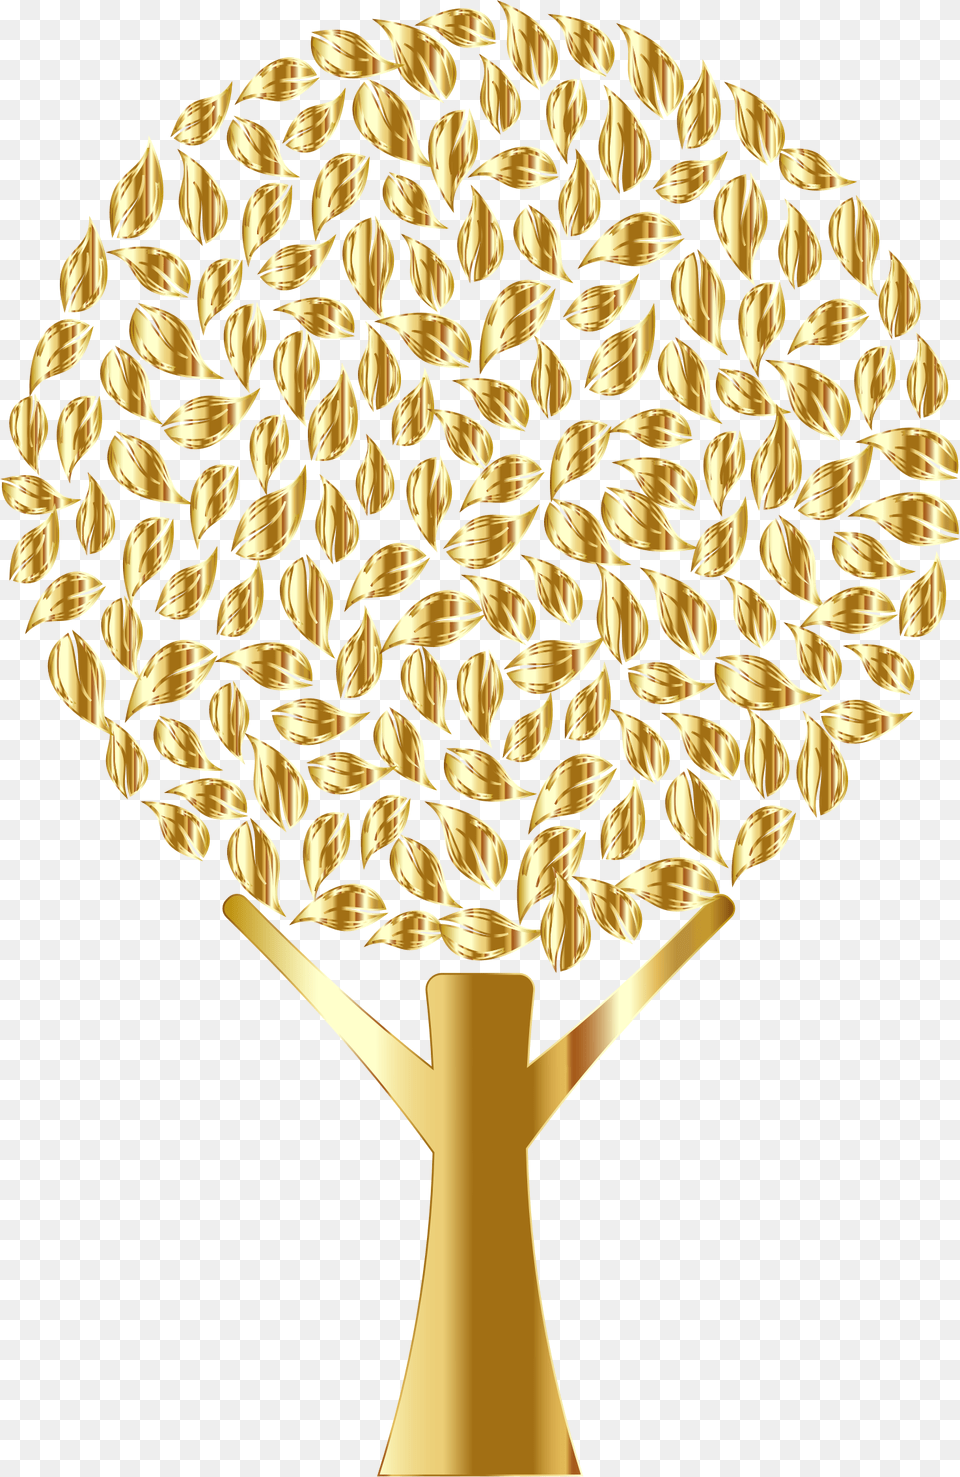 Golden Abstract Tree Variation 2 No Background Clip, Gold, Trophy, Racket, Chandelier Free Png Download